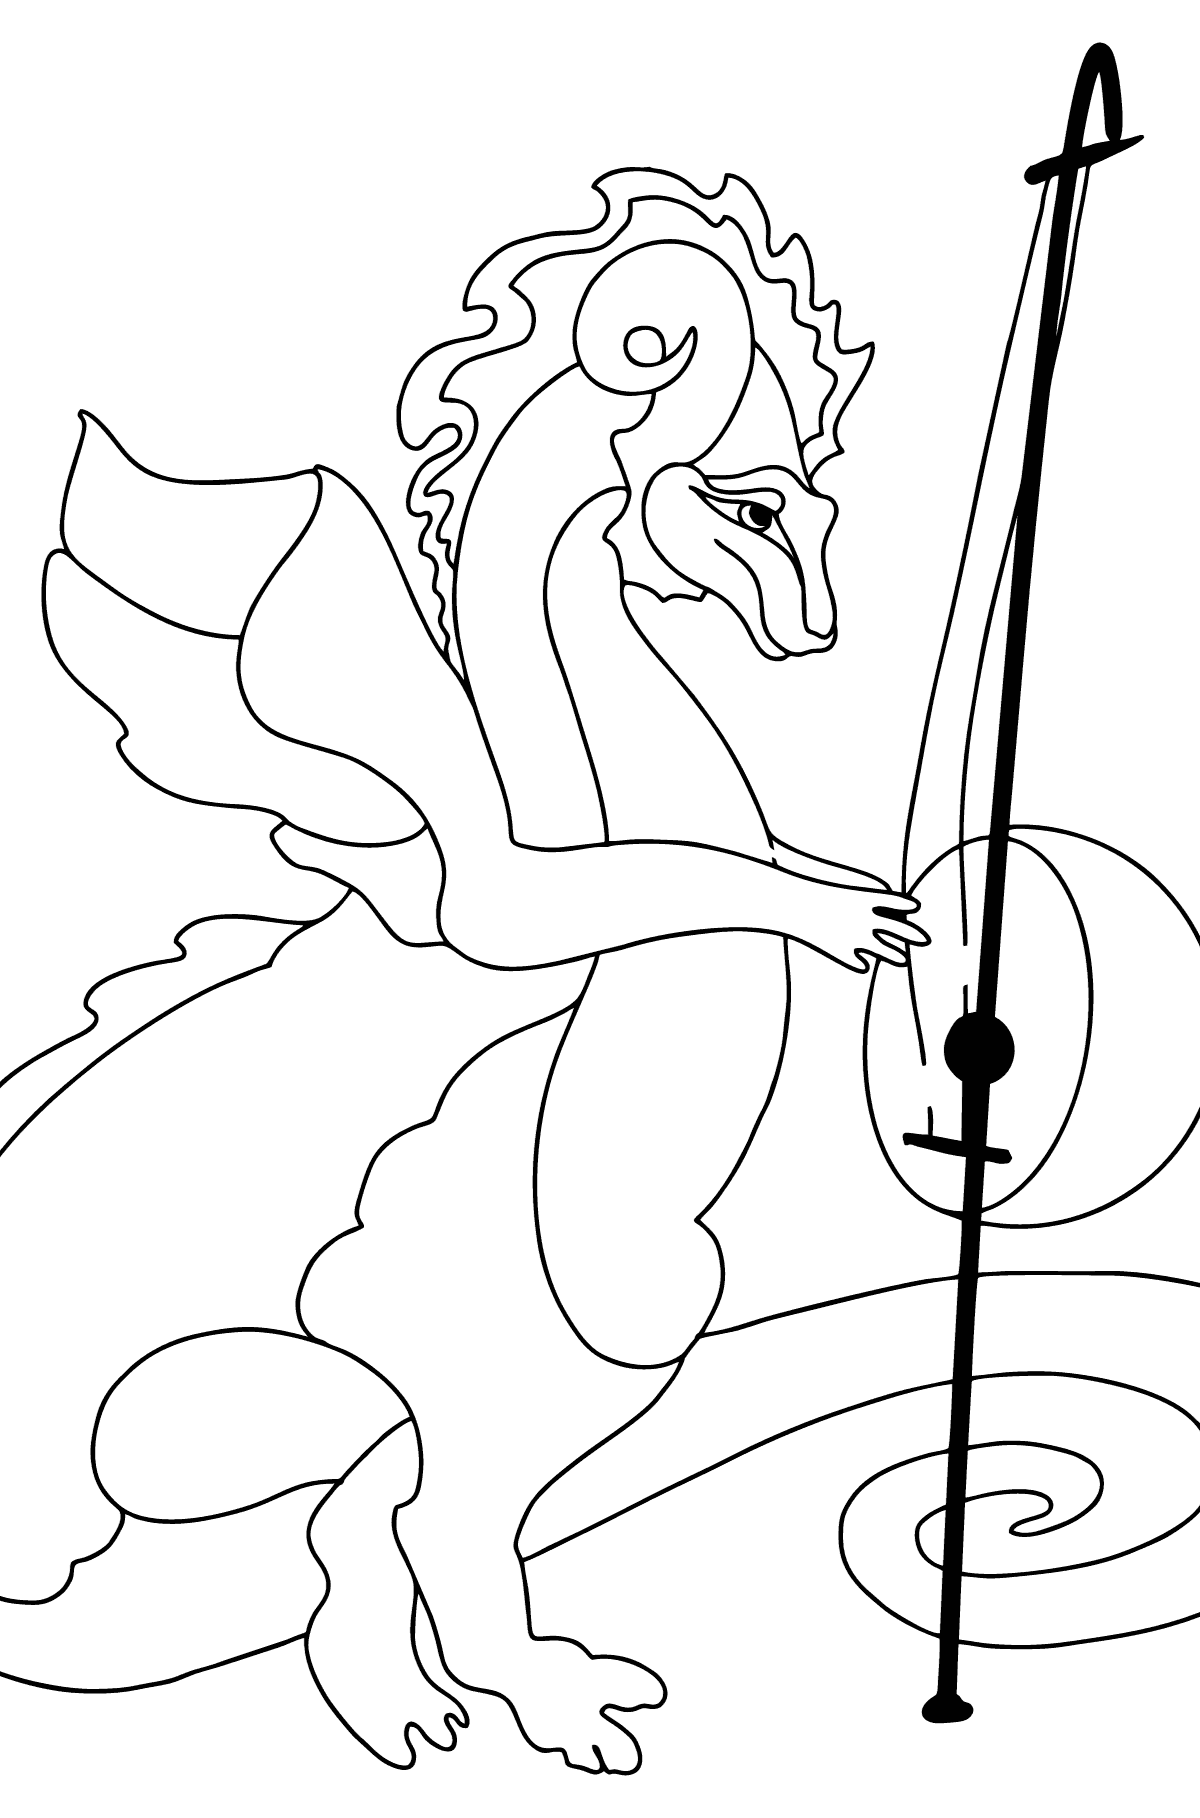 Musical Dragon Coloring Page (difficult) - Coloring Pages for Kids